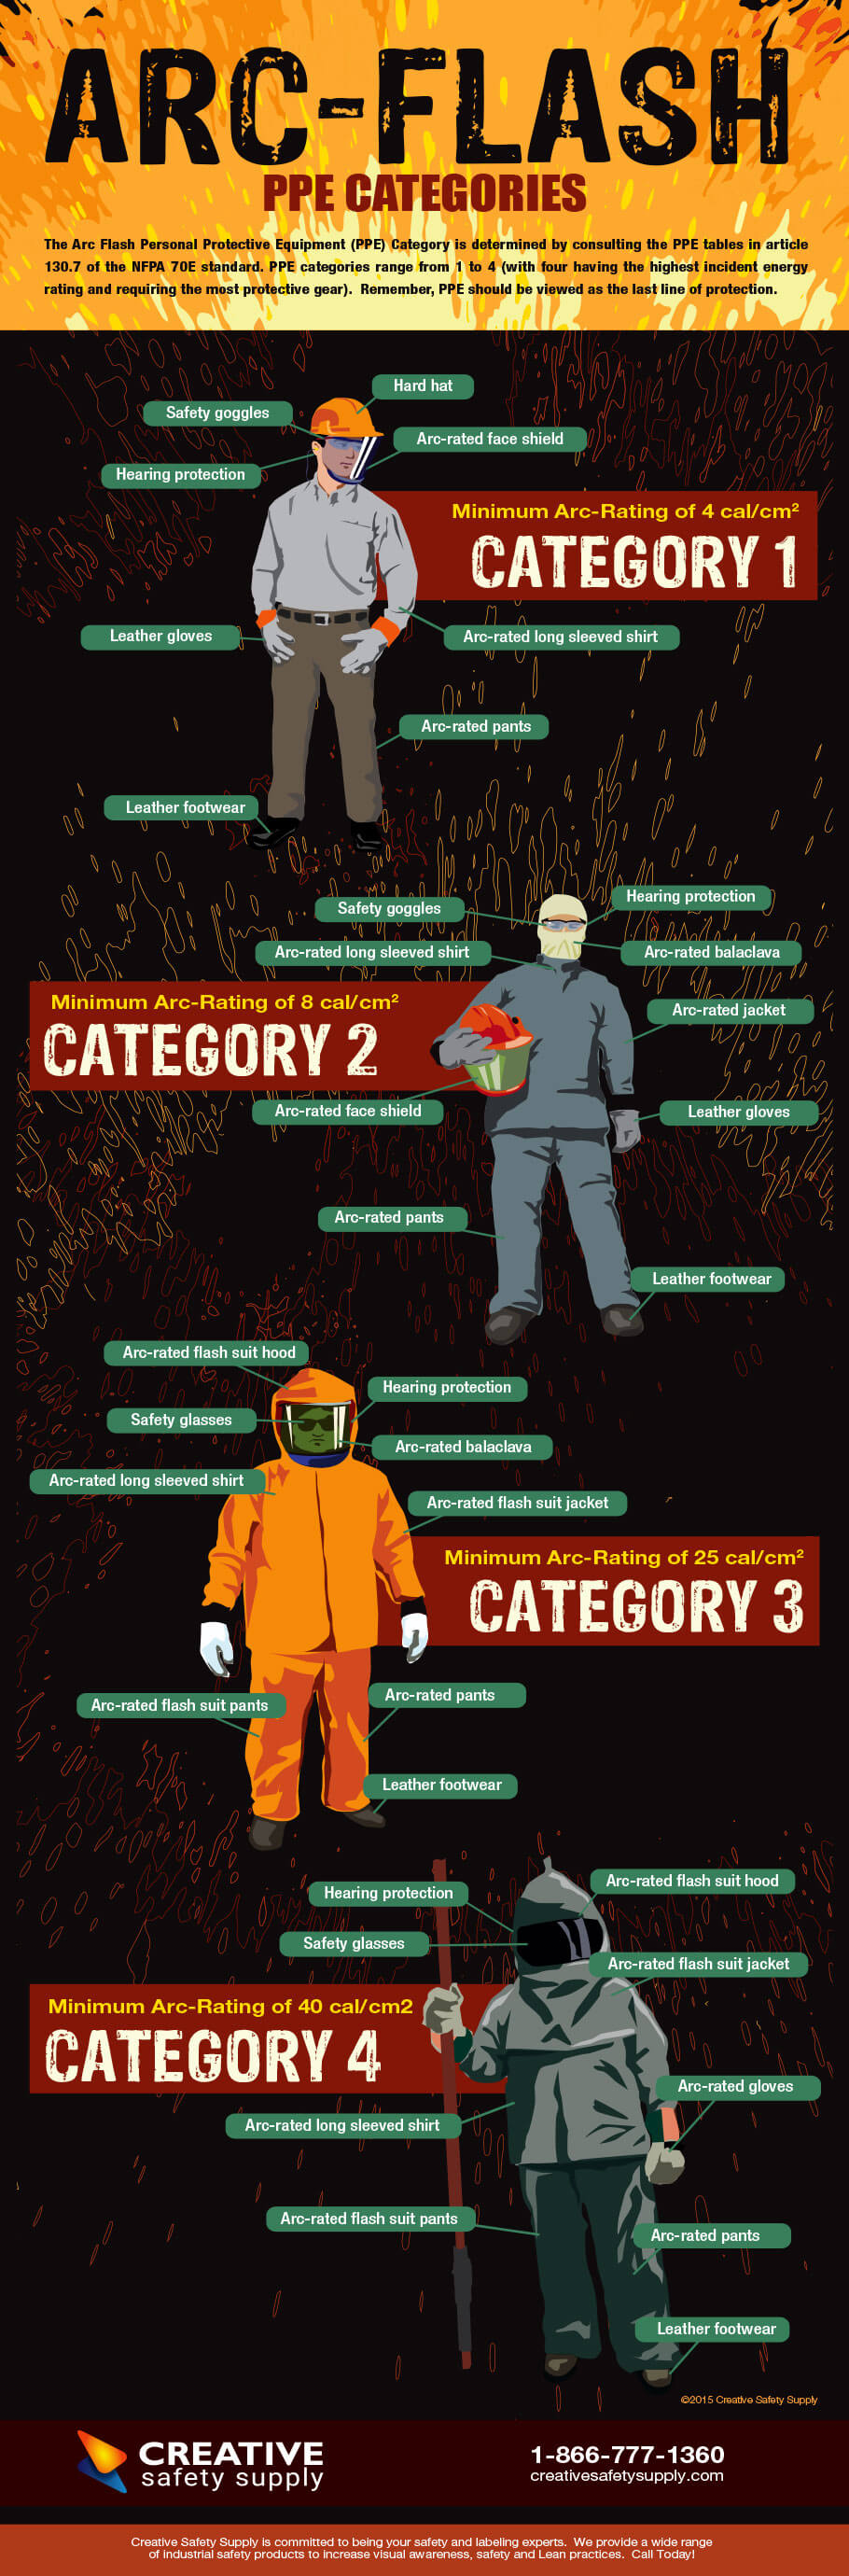 Arc Flash PPE Categories [Infographic]